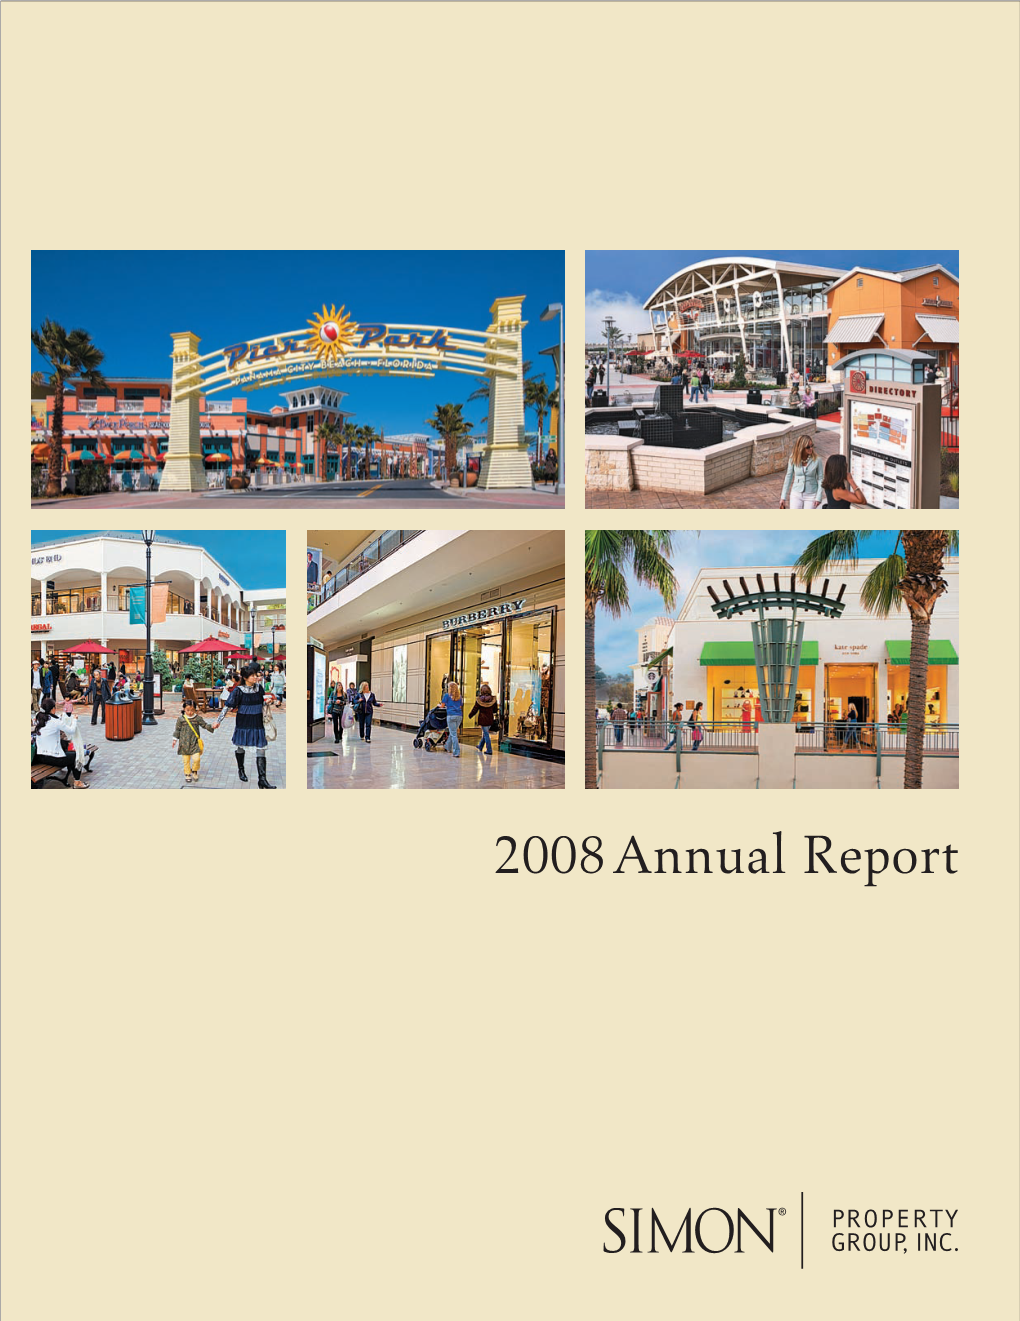 2008 Annual Report Imon Property Group, Inc